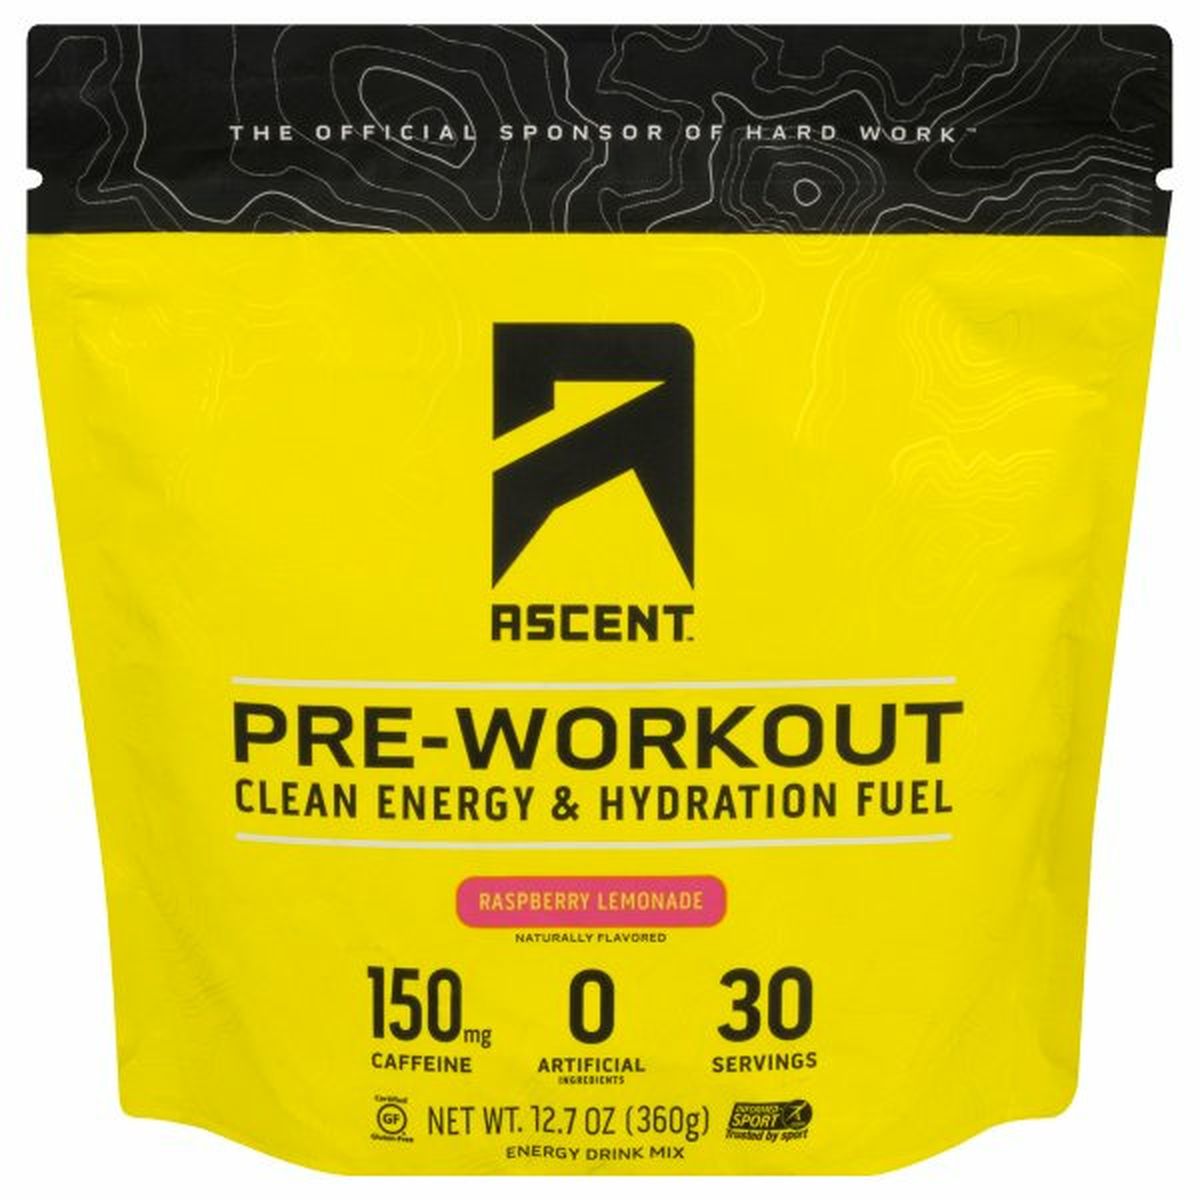 Calories in Ascent Energy Drink Mix, Pre-Workout, Raspberry Lemonade